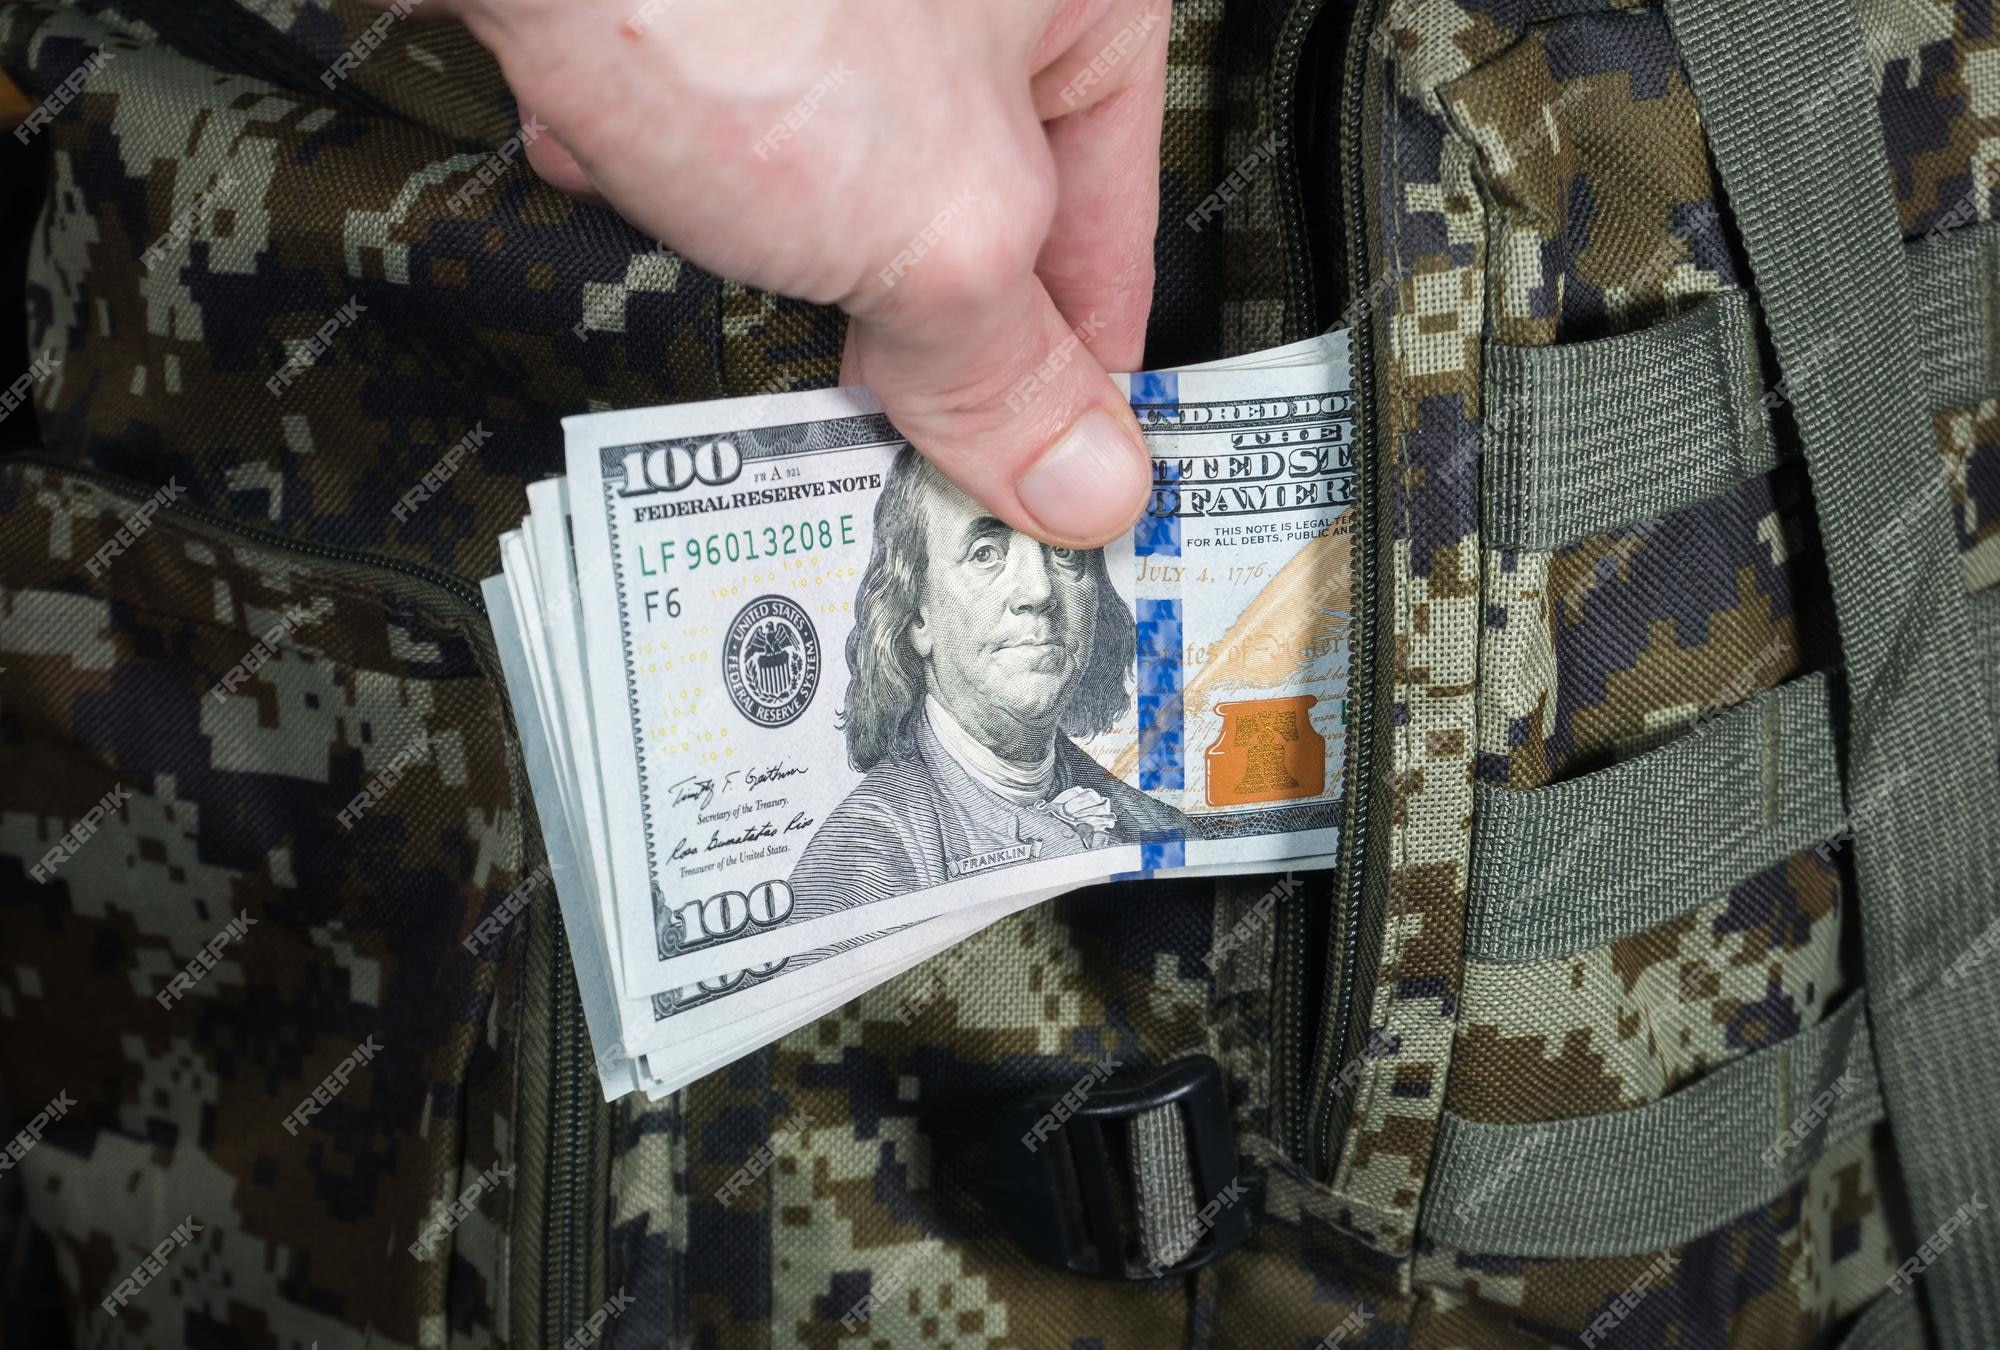 man-is-putting-military-backpack-dollarsxadark-green-camouflage-khaki-bag-with-money-migrants-refugees-concept_370059-6562.jpg